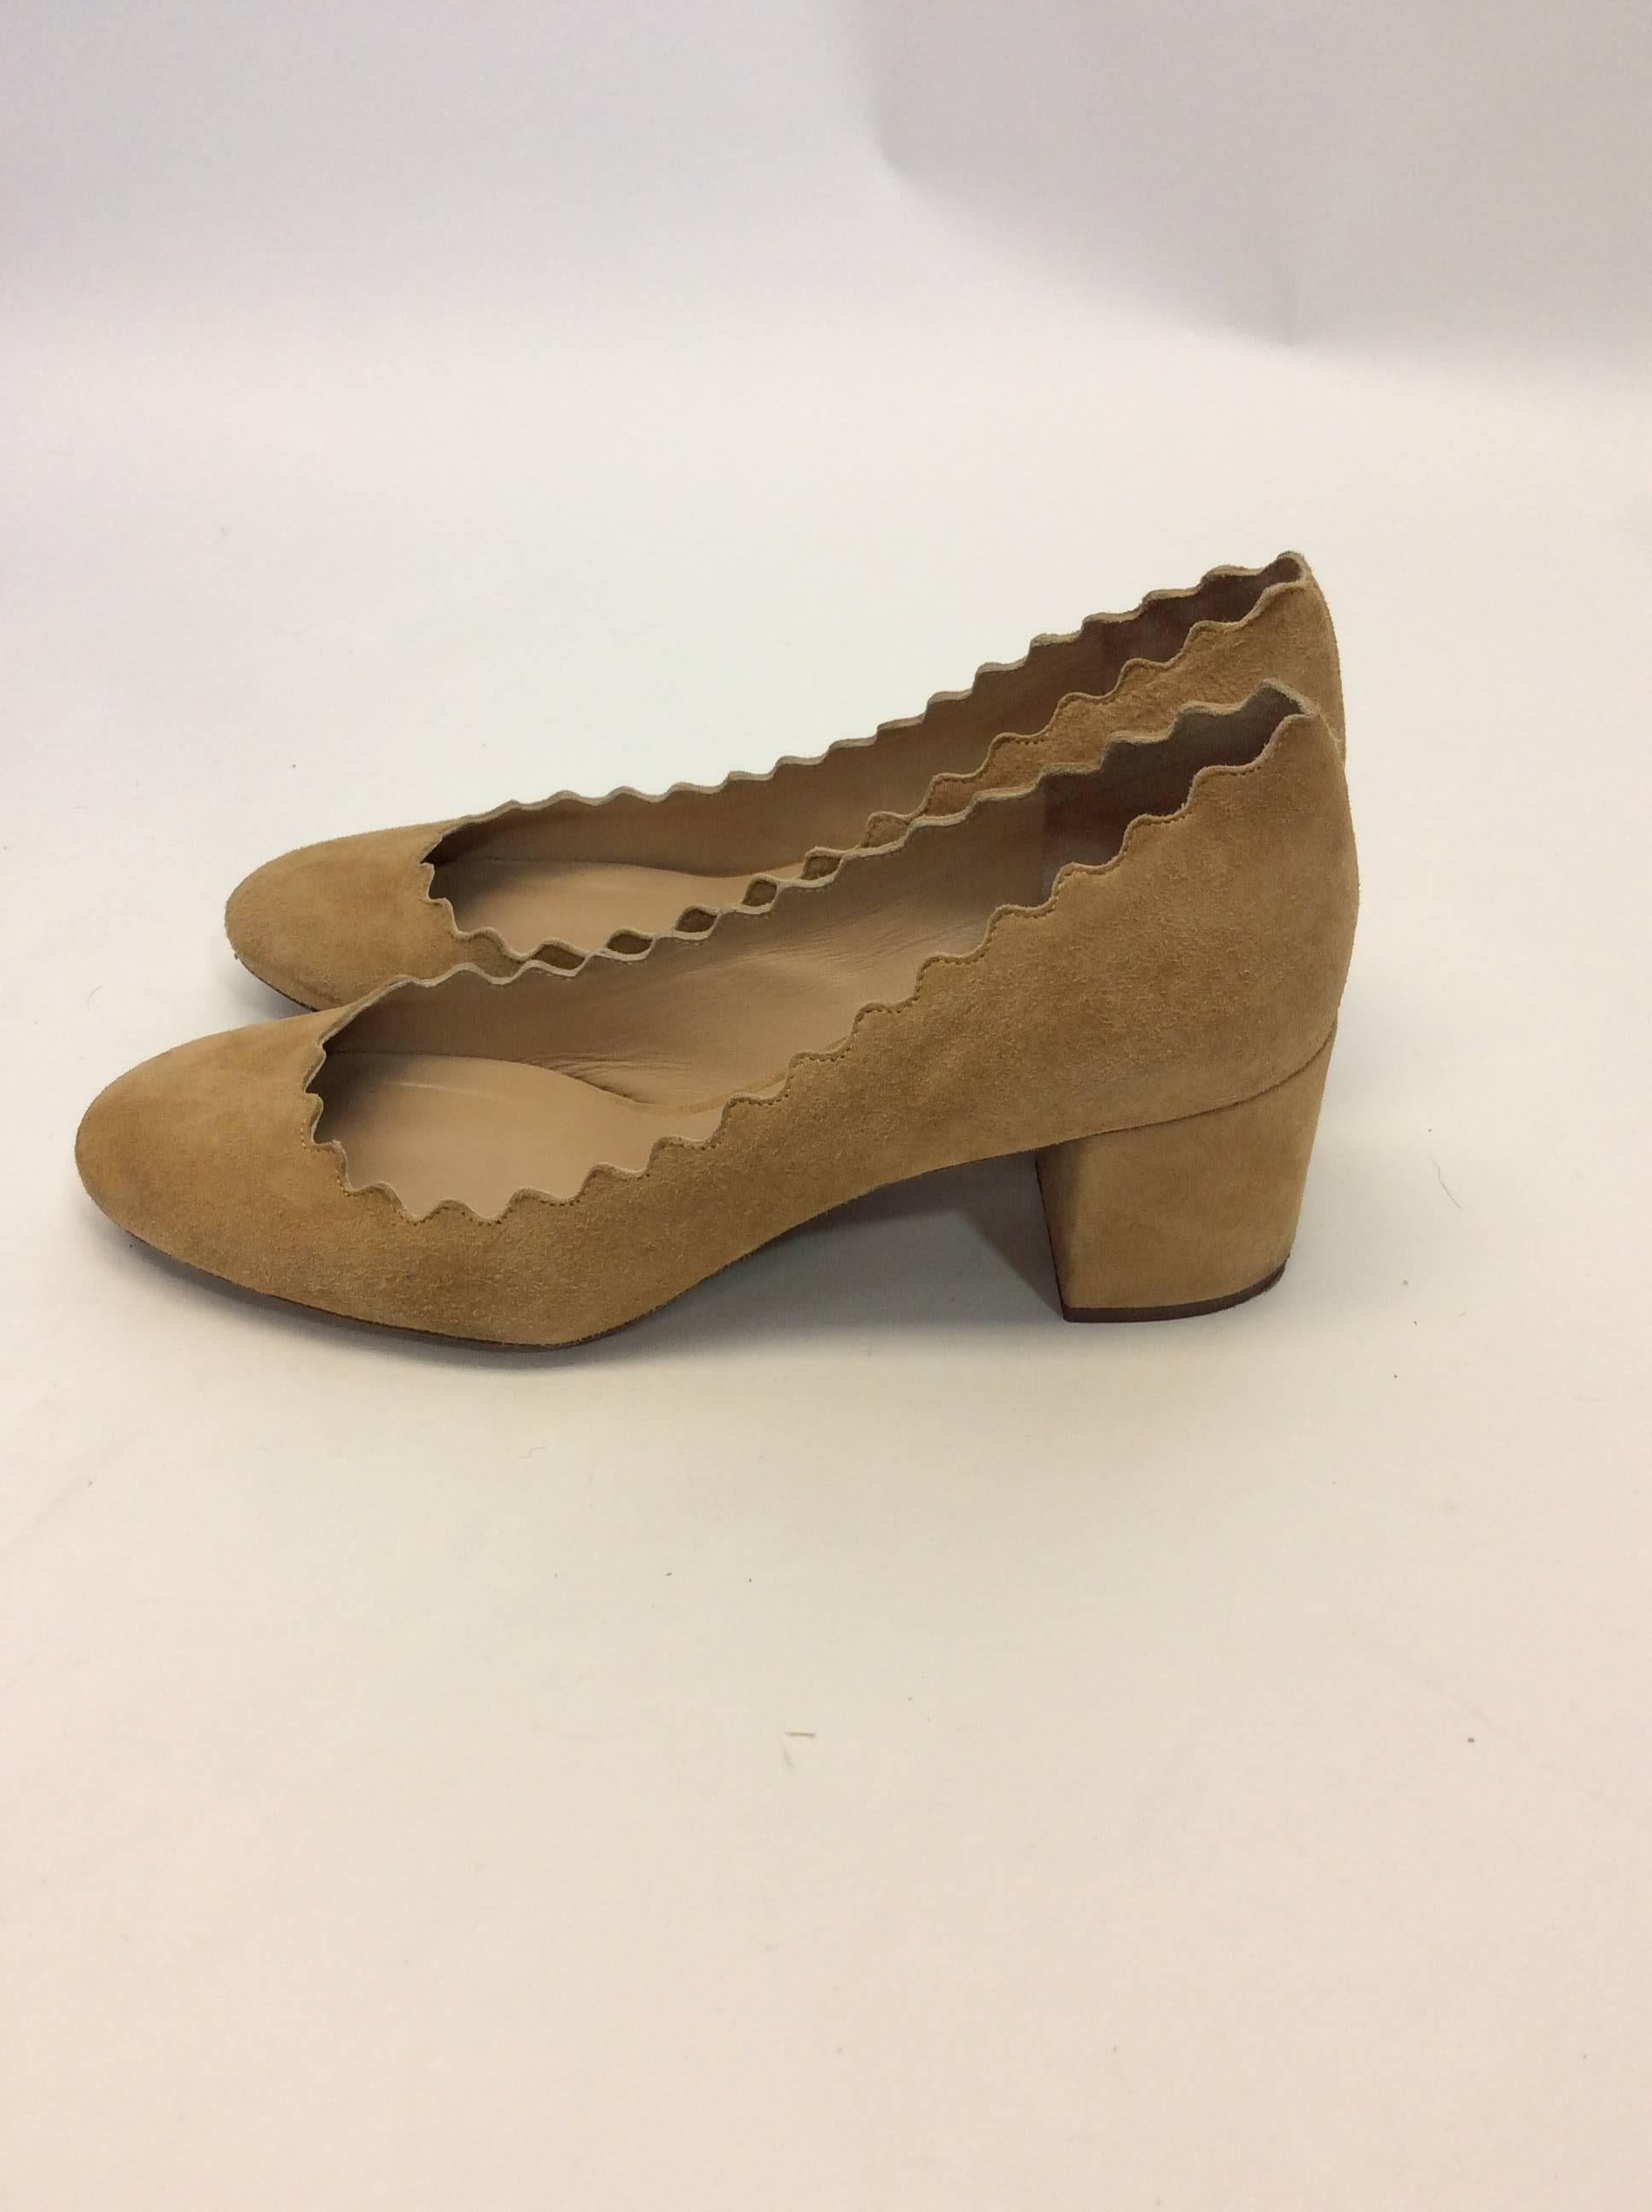 Chloe Suede Scalloped Heels
Suede exterior, leather interior
Made in Italy
Size 36
$250
Scalloped trim
3 inch heel